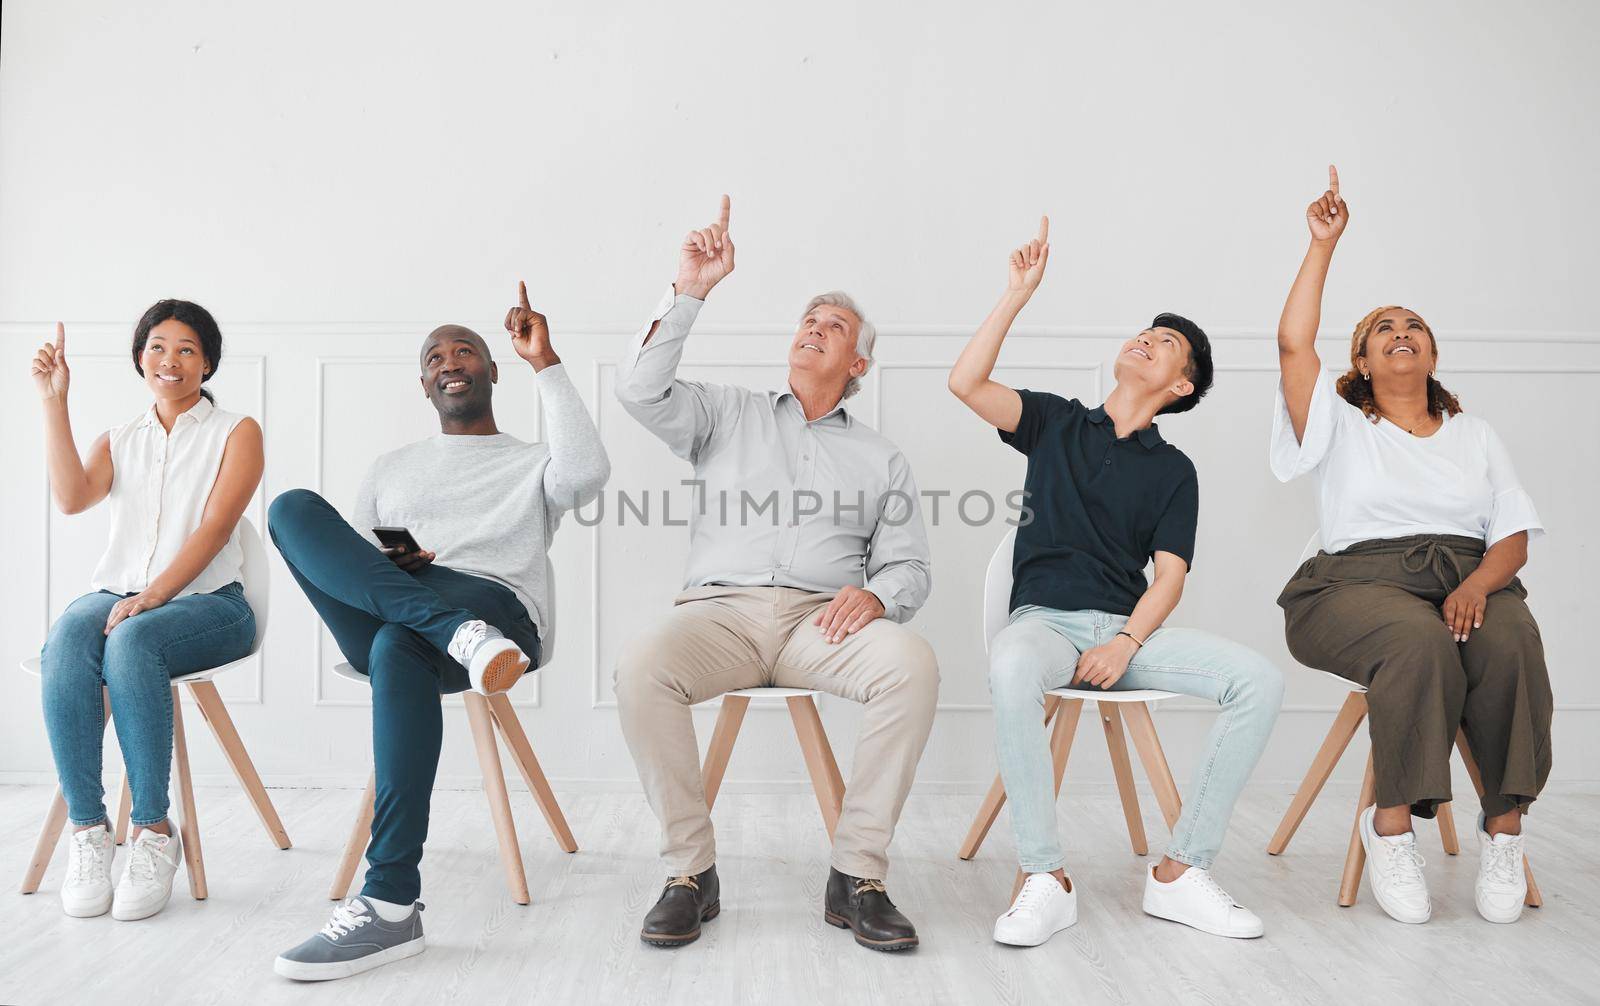 a diverse group of people pointing up while sitting in line against a white background.